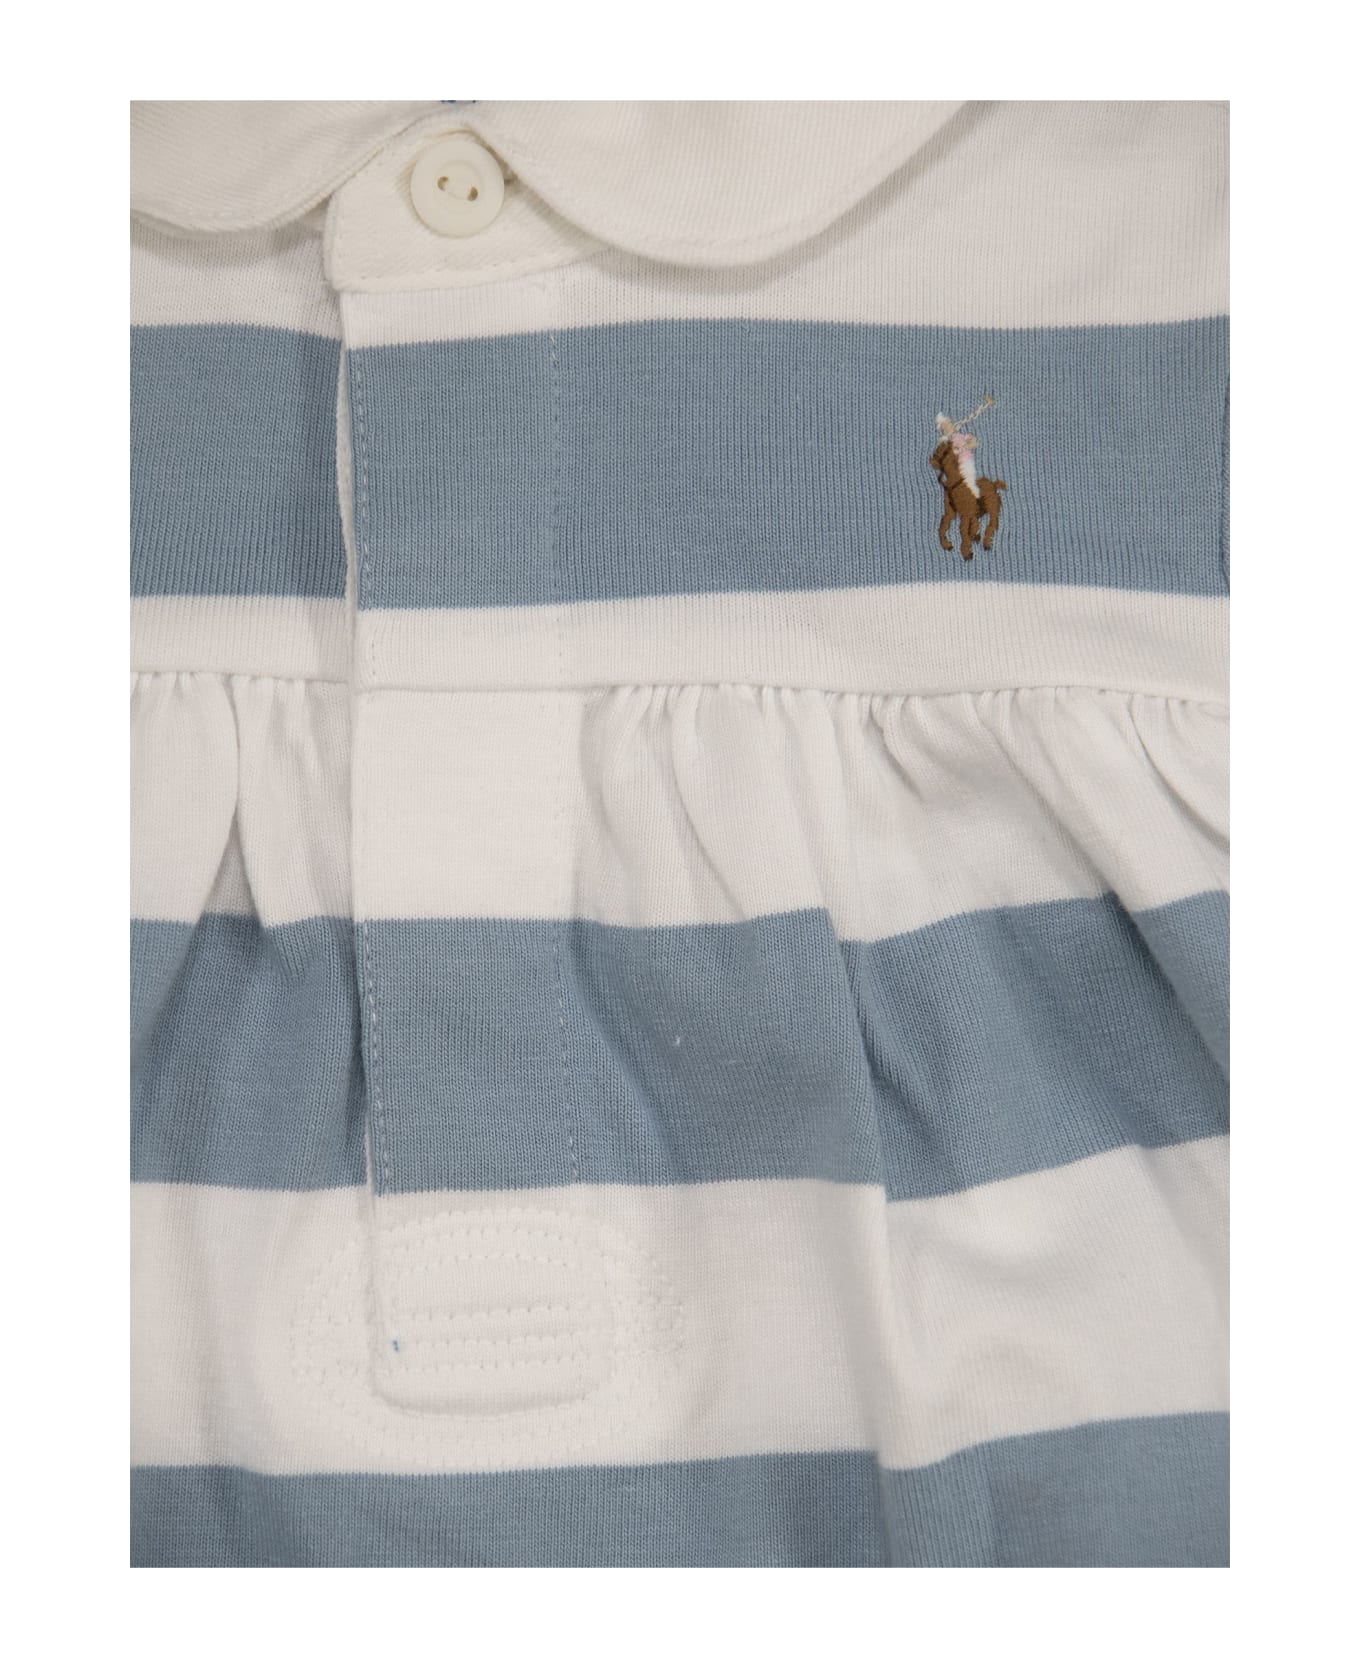 Polo Ralph Lauren Striped Jersey Rugby Dress With Culottes - Blue/white